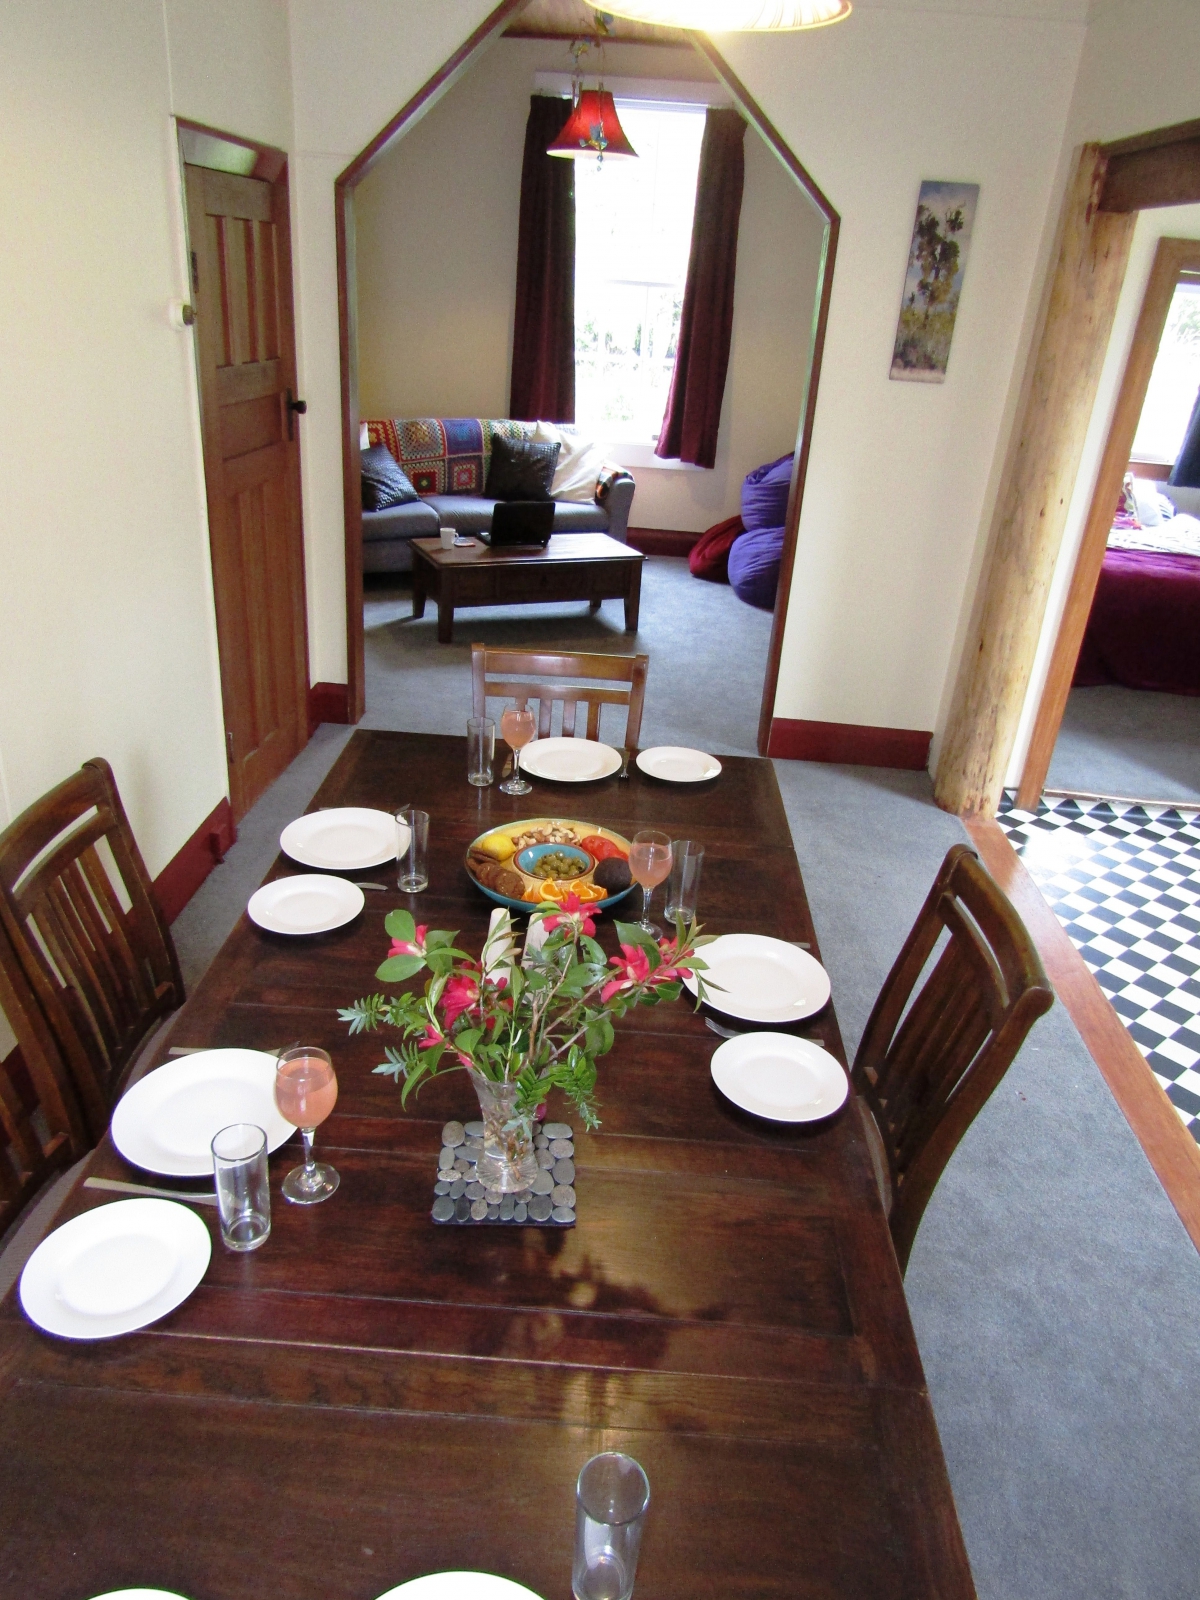 Photo of property: Dining table